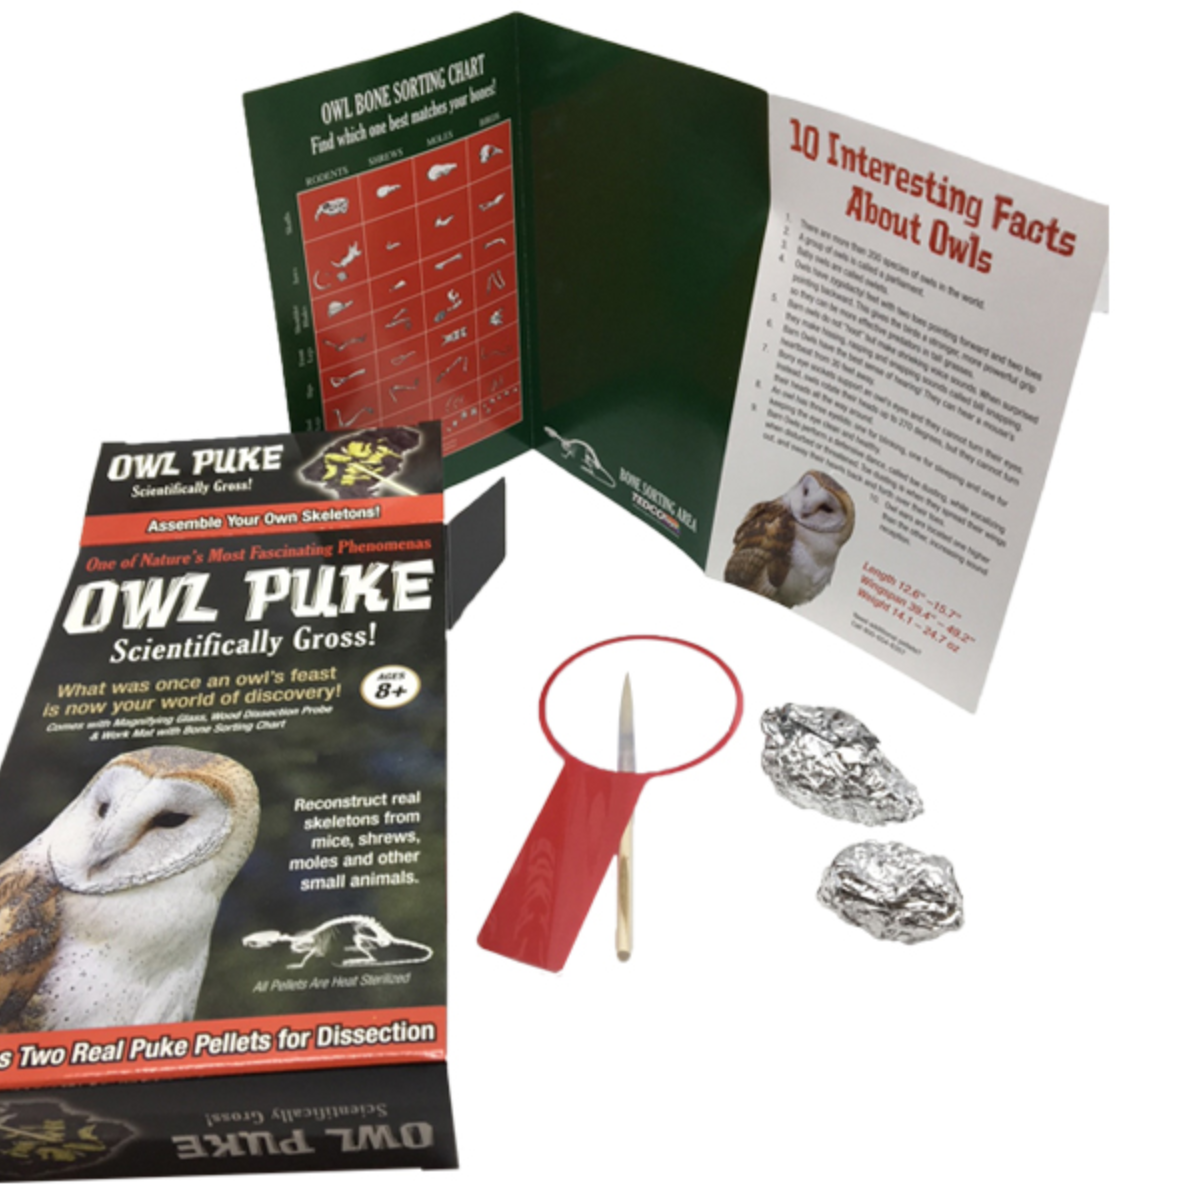 owl puke science kit tedco toys feast discovery sanitized pellet reconstruct skeletons surprise gross mice shrew moles small animals puke magnifying glass wood dissection stick work mat bone sorting chart ages 8+